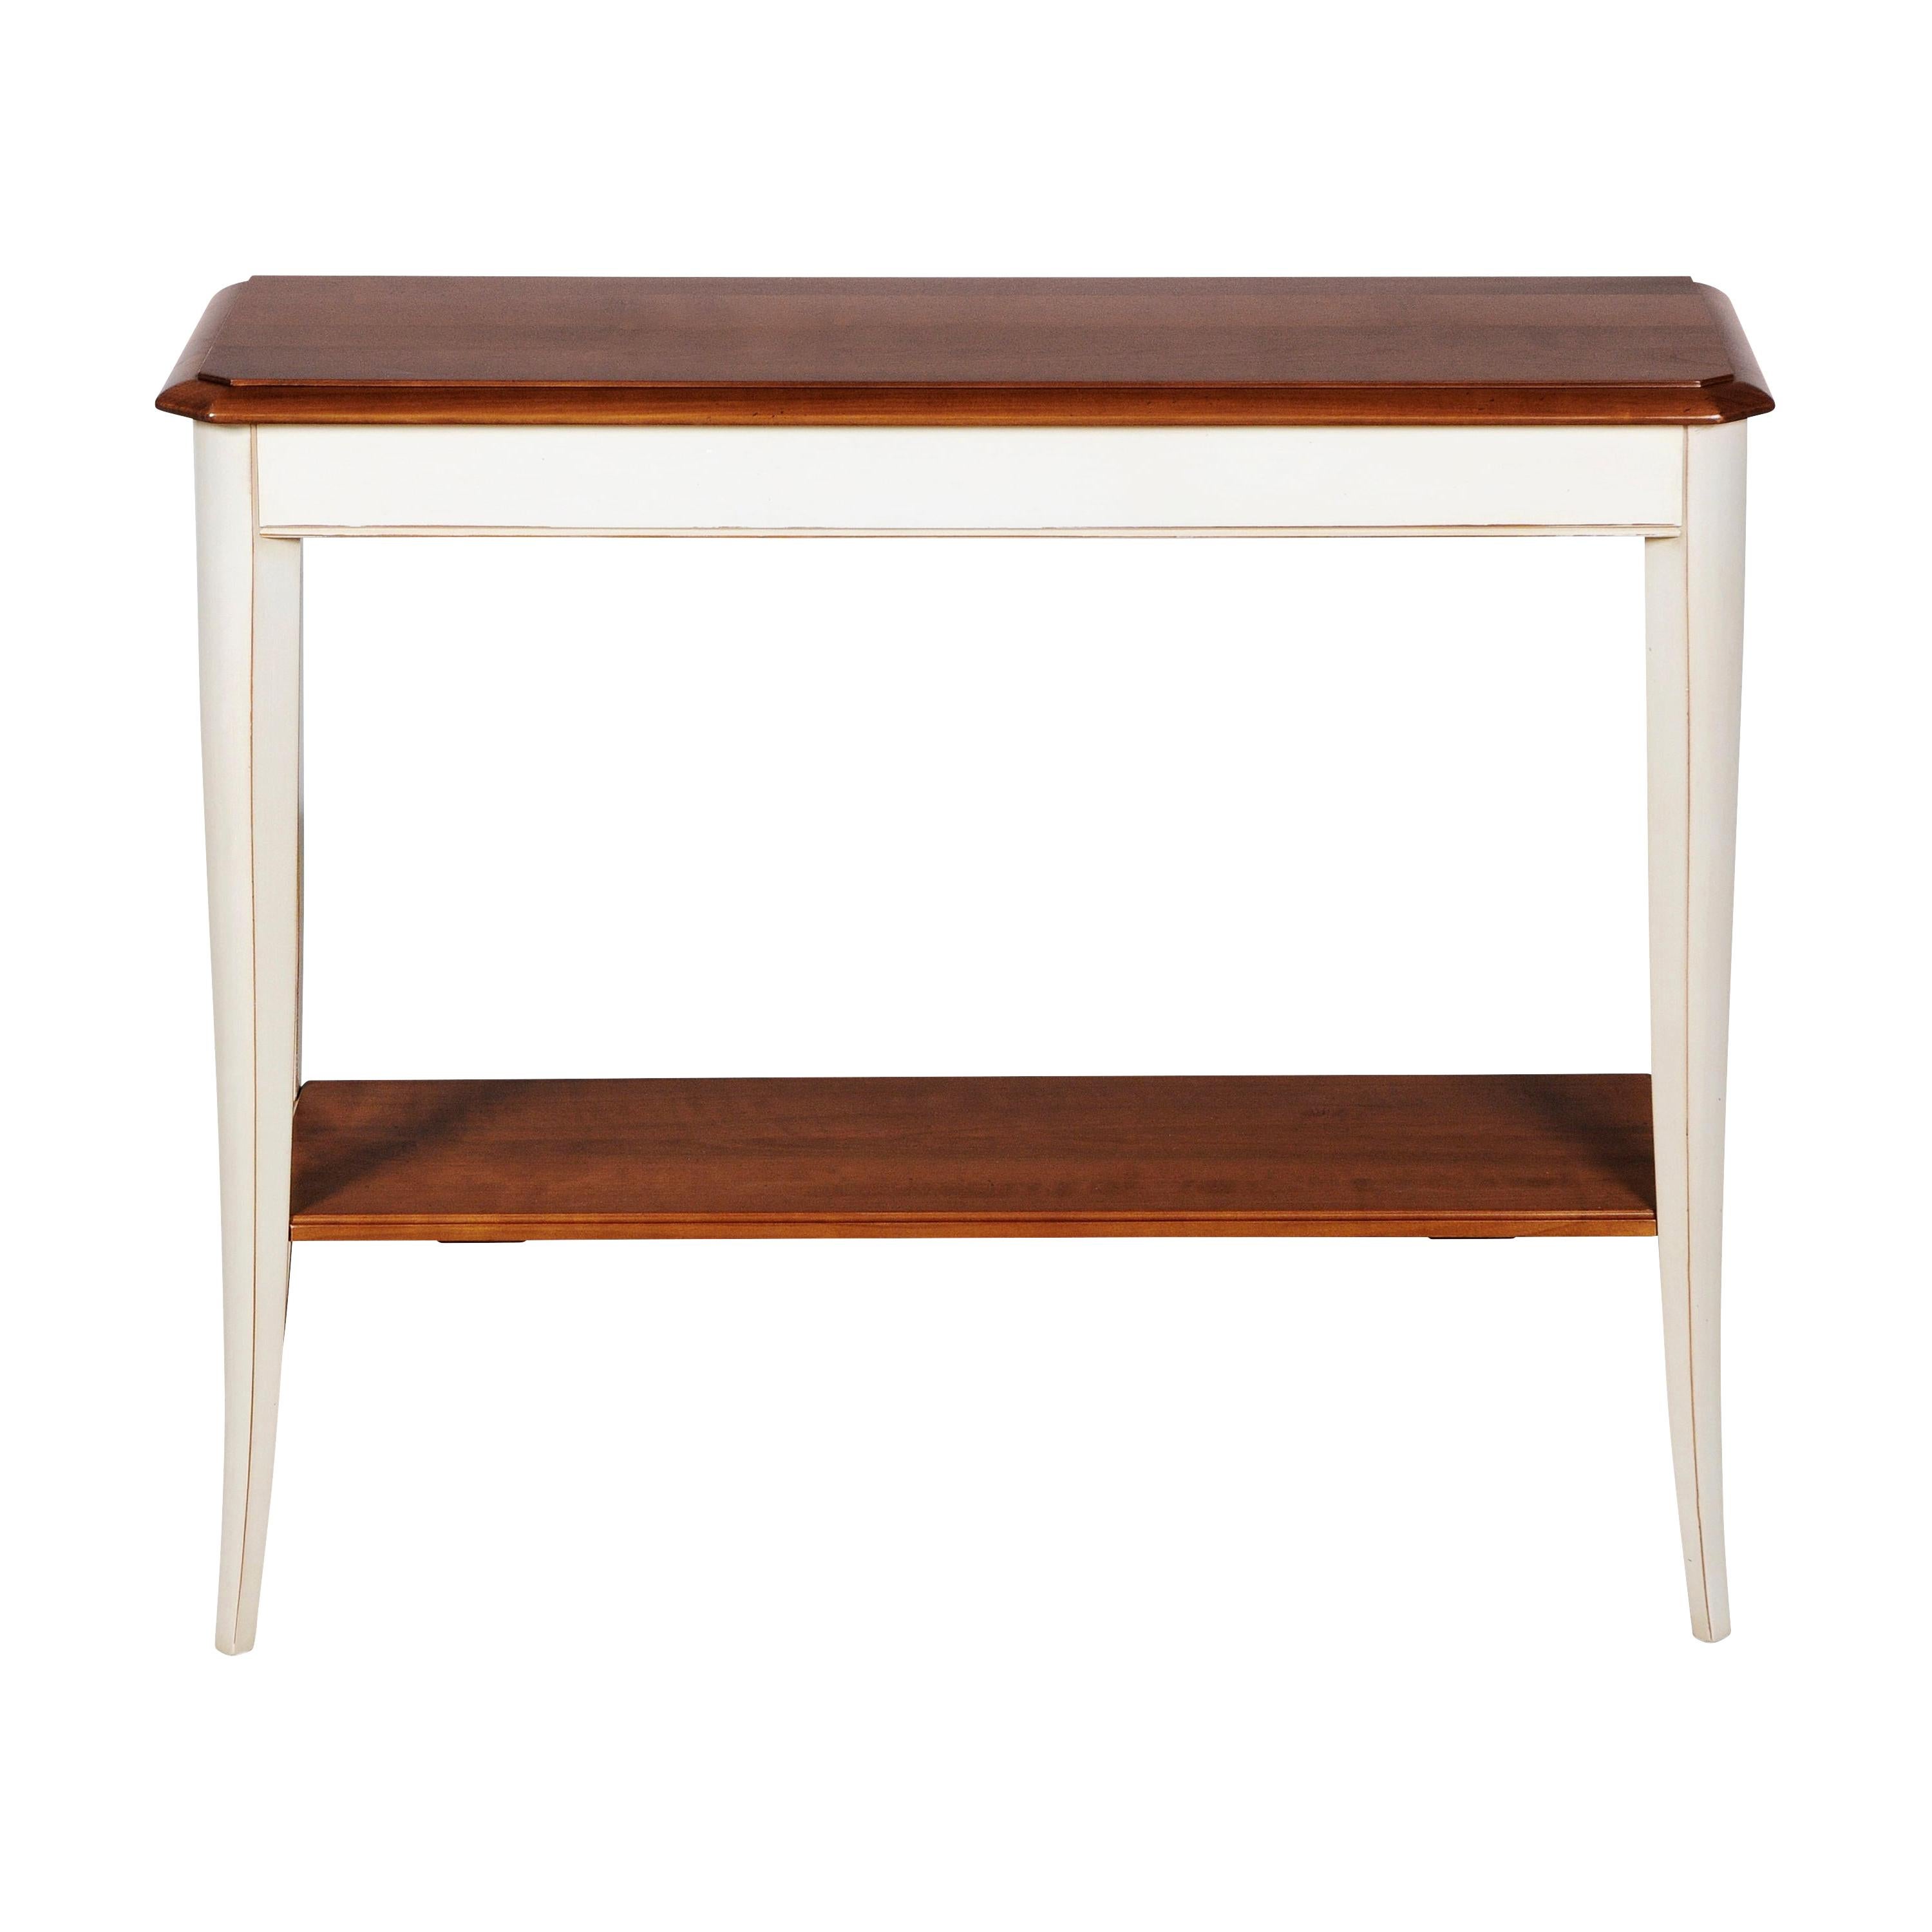 French Countryside Console Table in Cherry, 100% Made in France For Sale